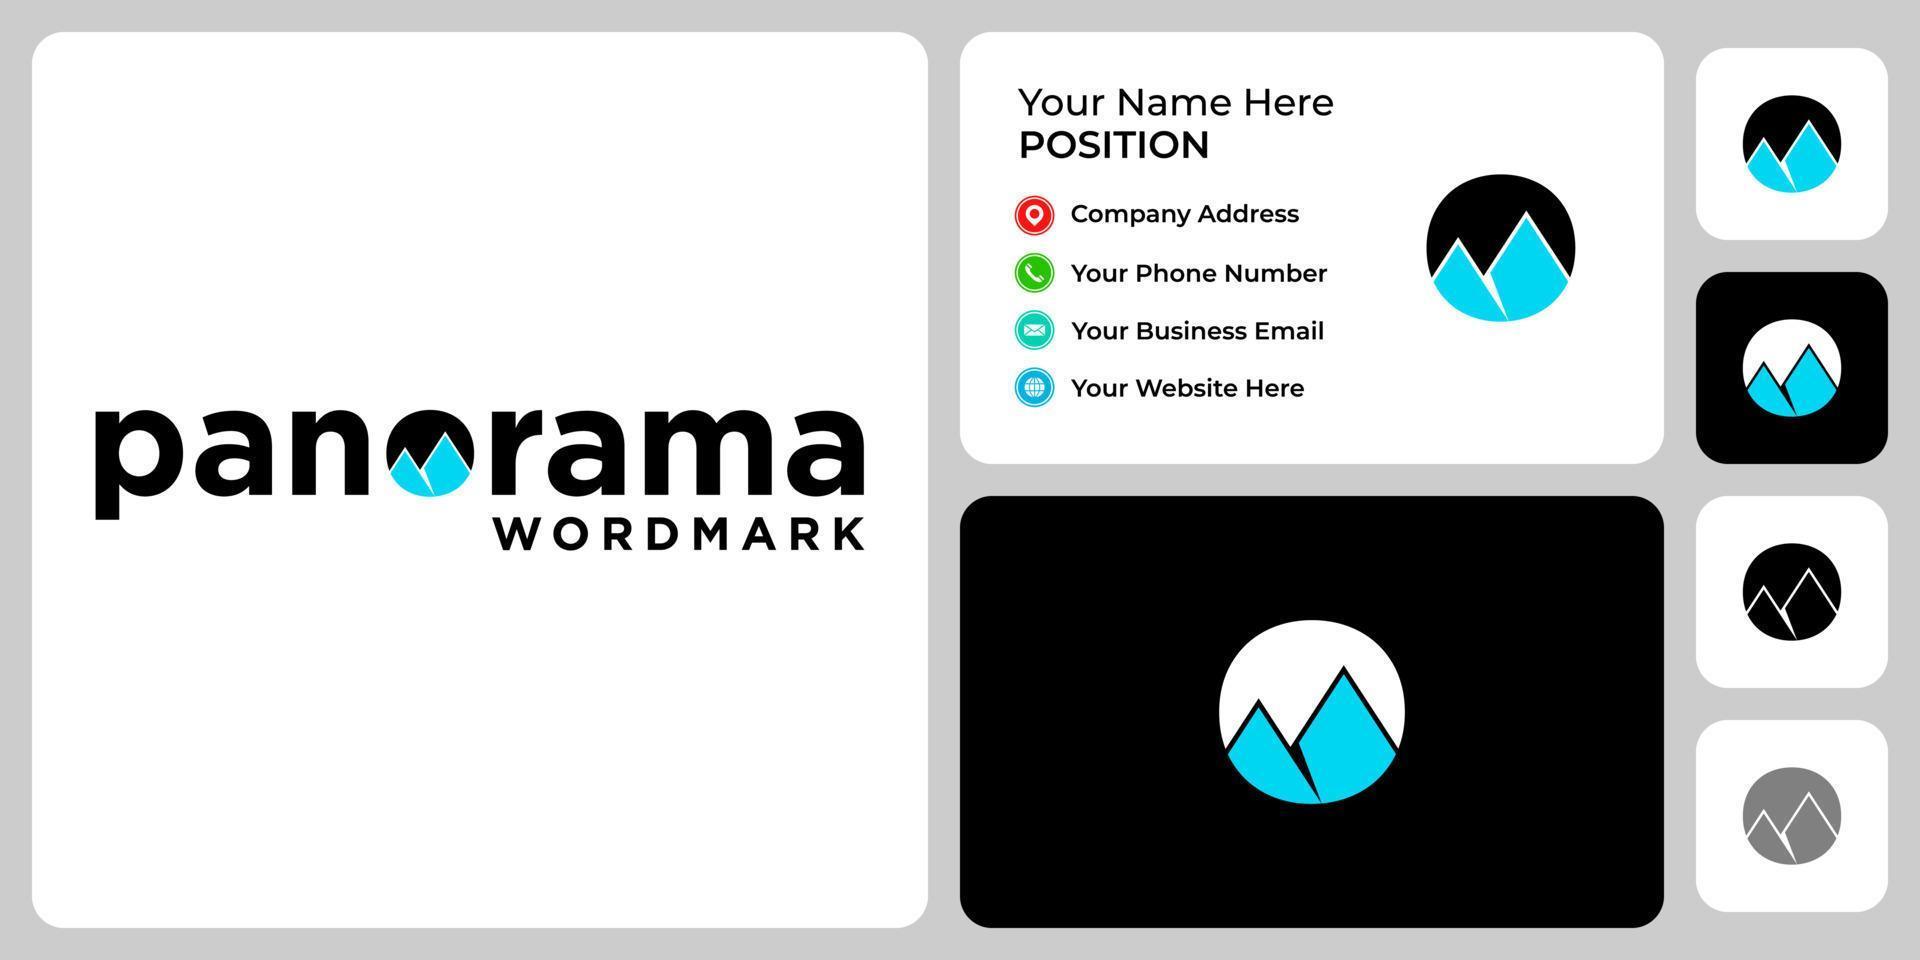 Letter O wordmark panorama logo design with business card template. vector